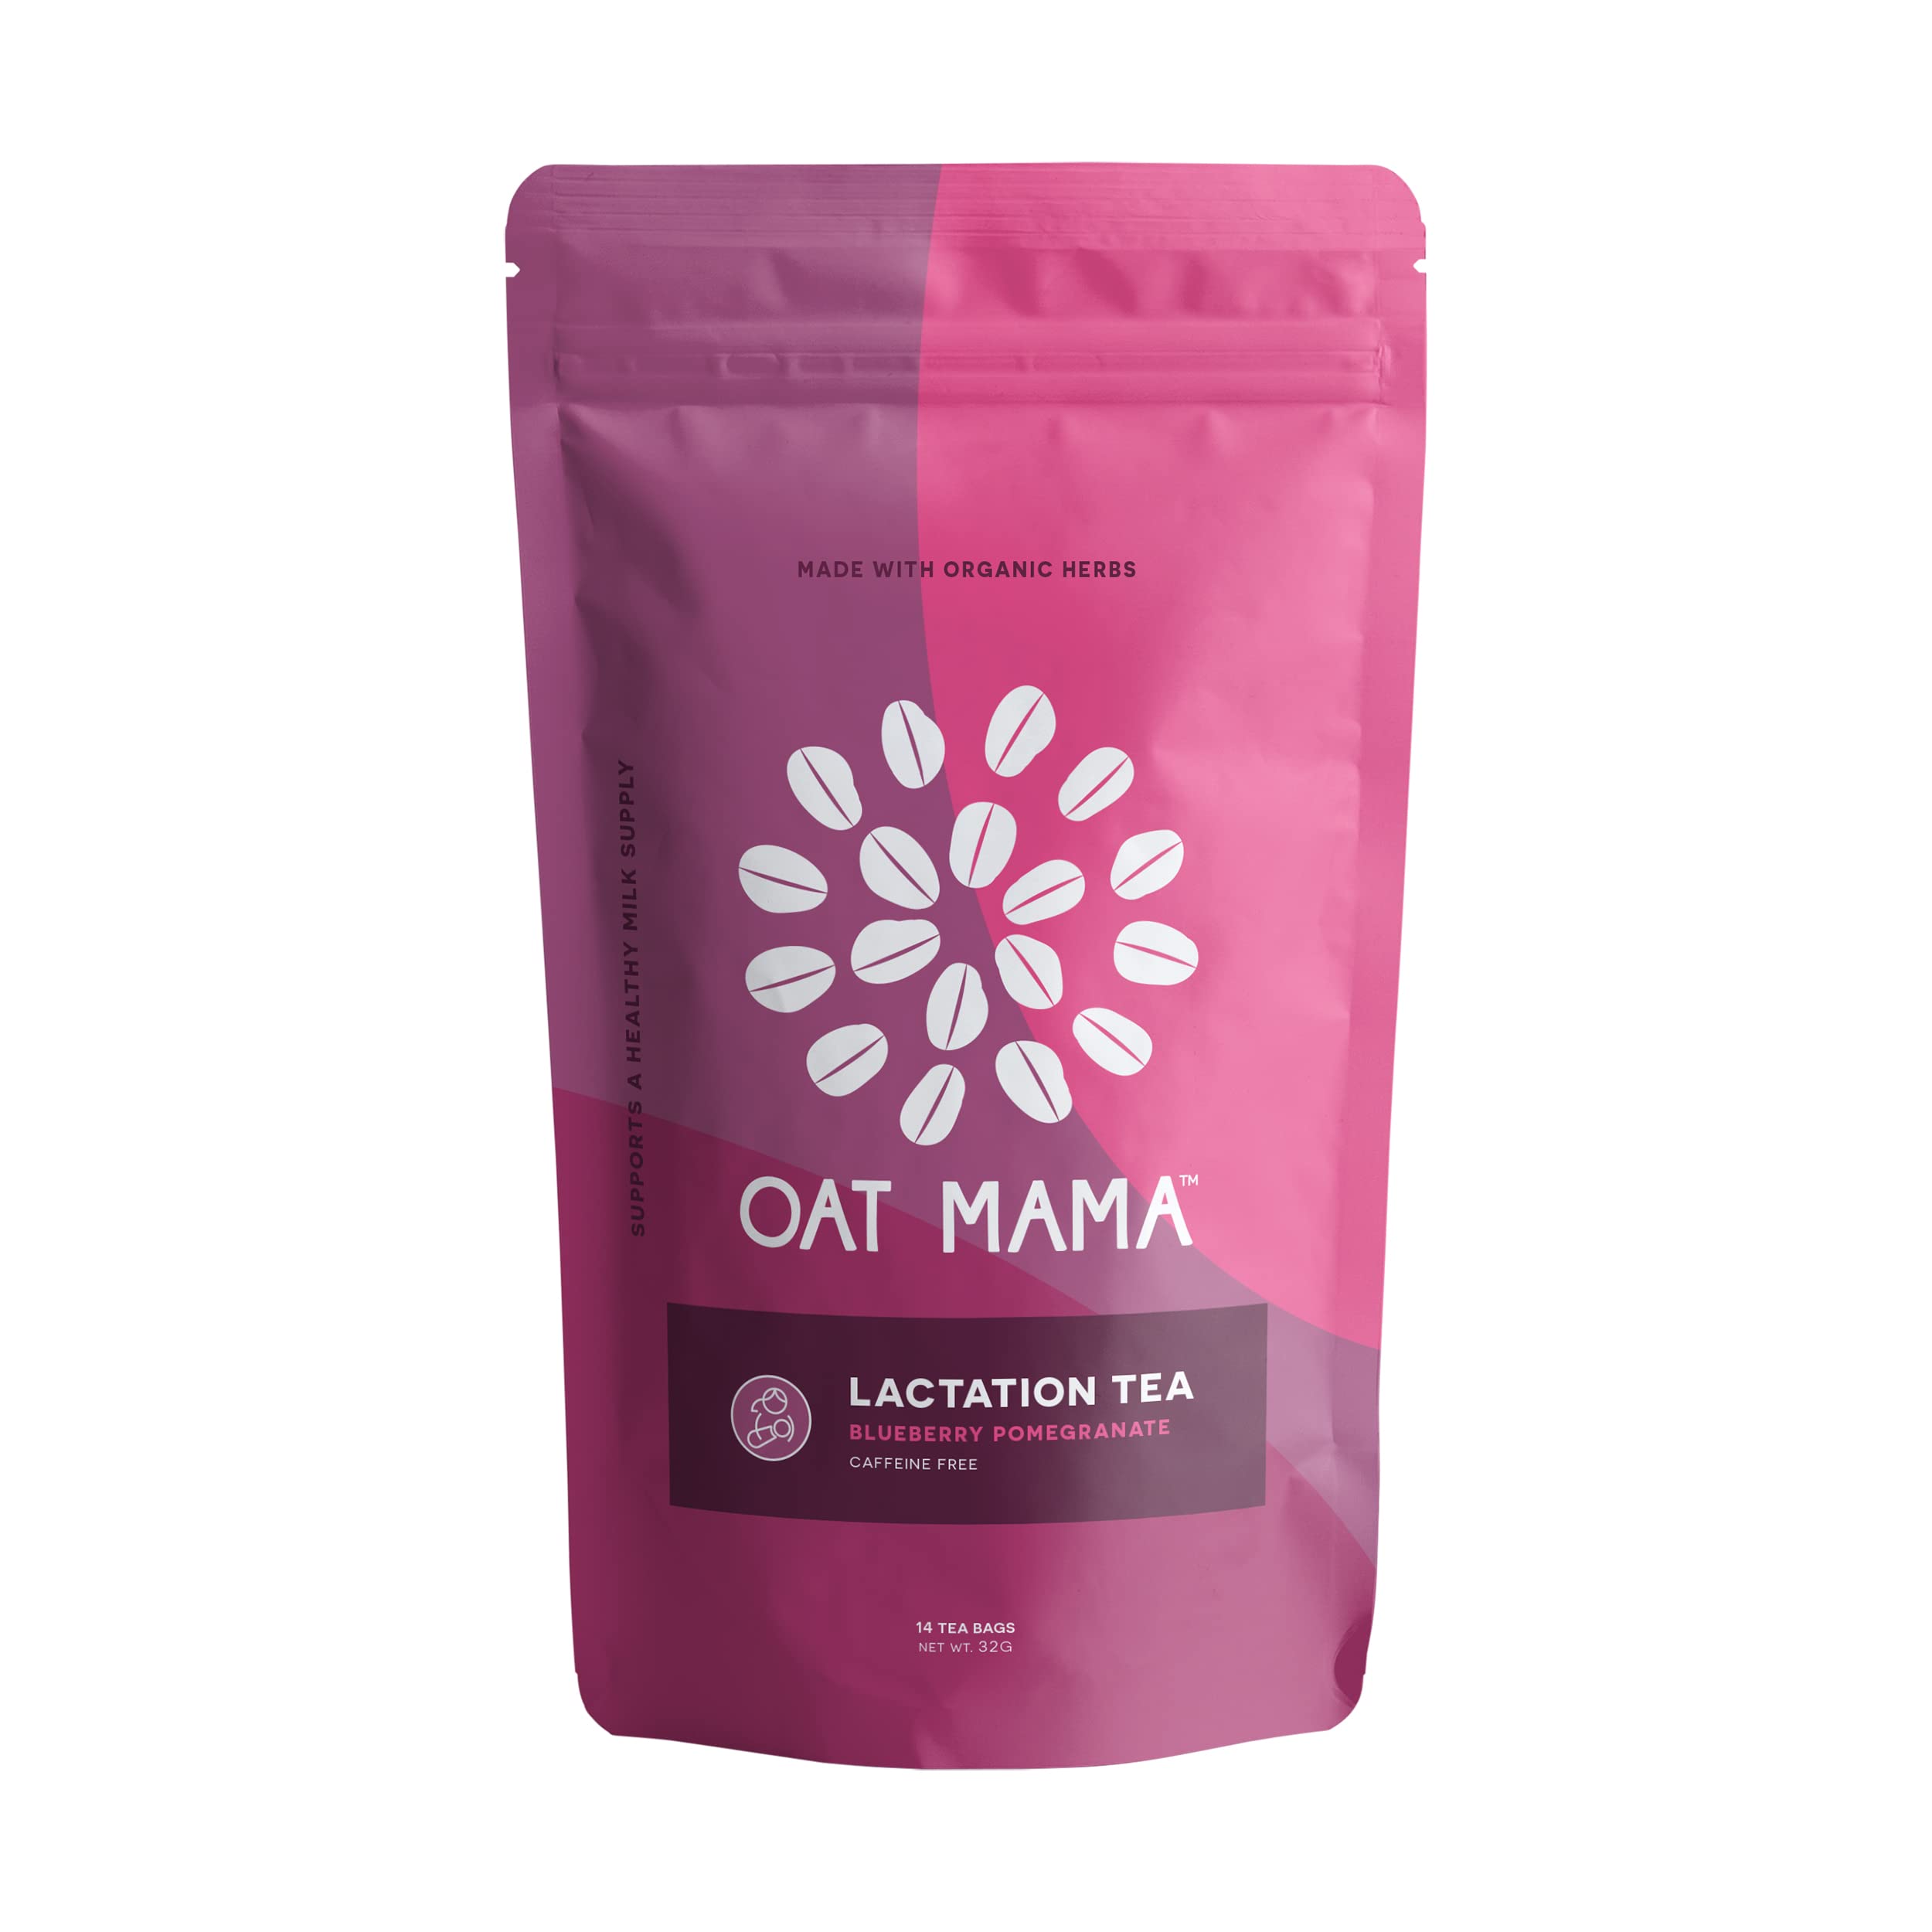 Book Cover Oat Mama Lactation Tea: Blueberry Pomegranate, Organic Herbs to Help Increase Breast Milk Supply, Lactation Support for Breastfeeding Moms, Fenugreek-Free, 14 Biodegradable Tea Sachets, Women-Owned